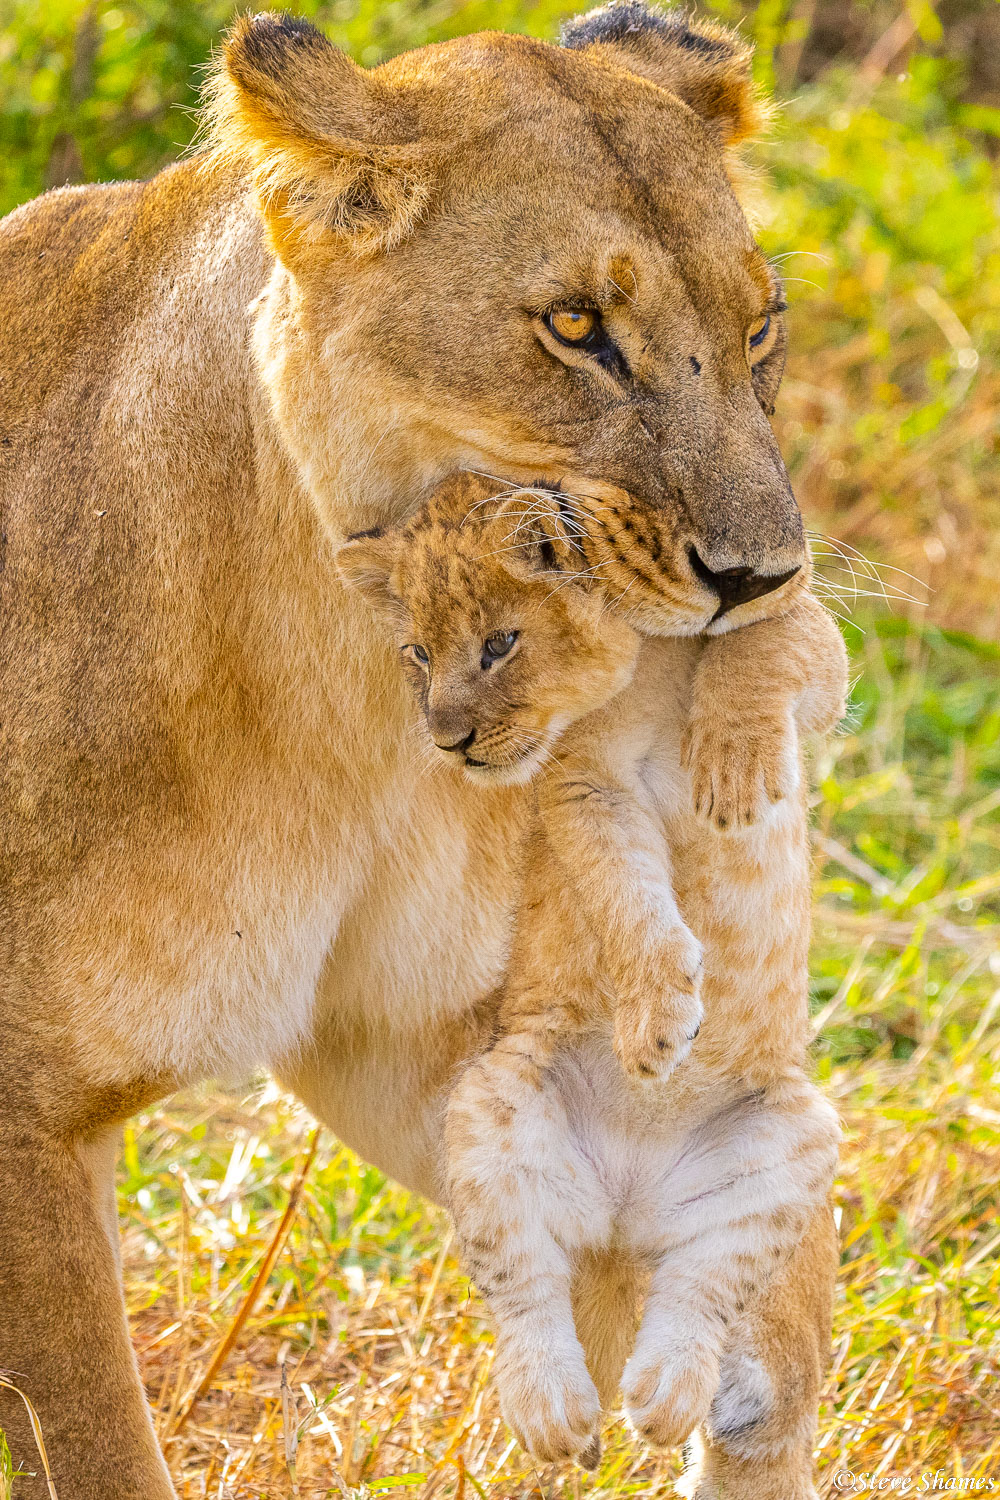 Mother lion carrying her cub. The cub does not seem to mind.